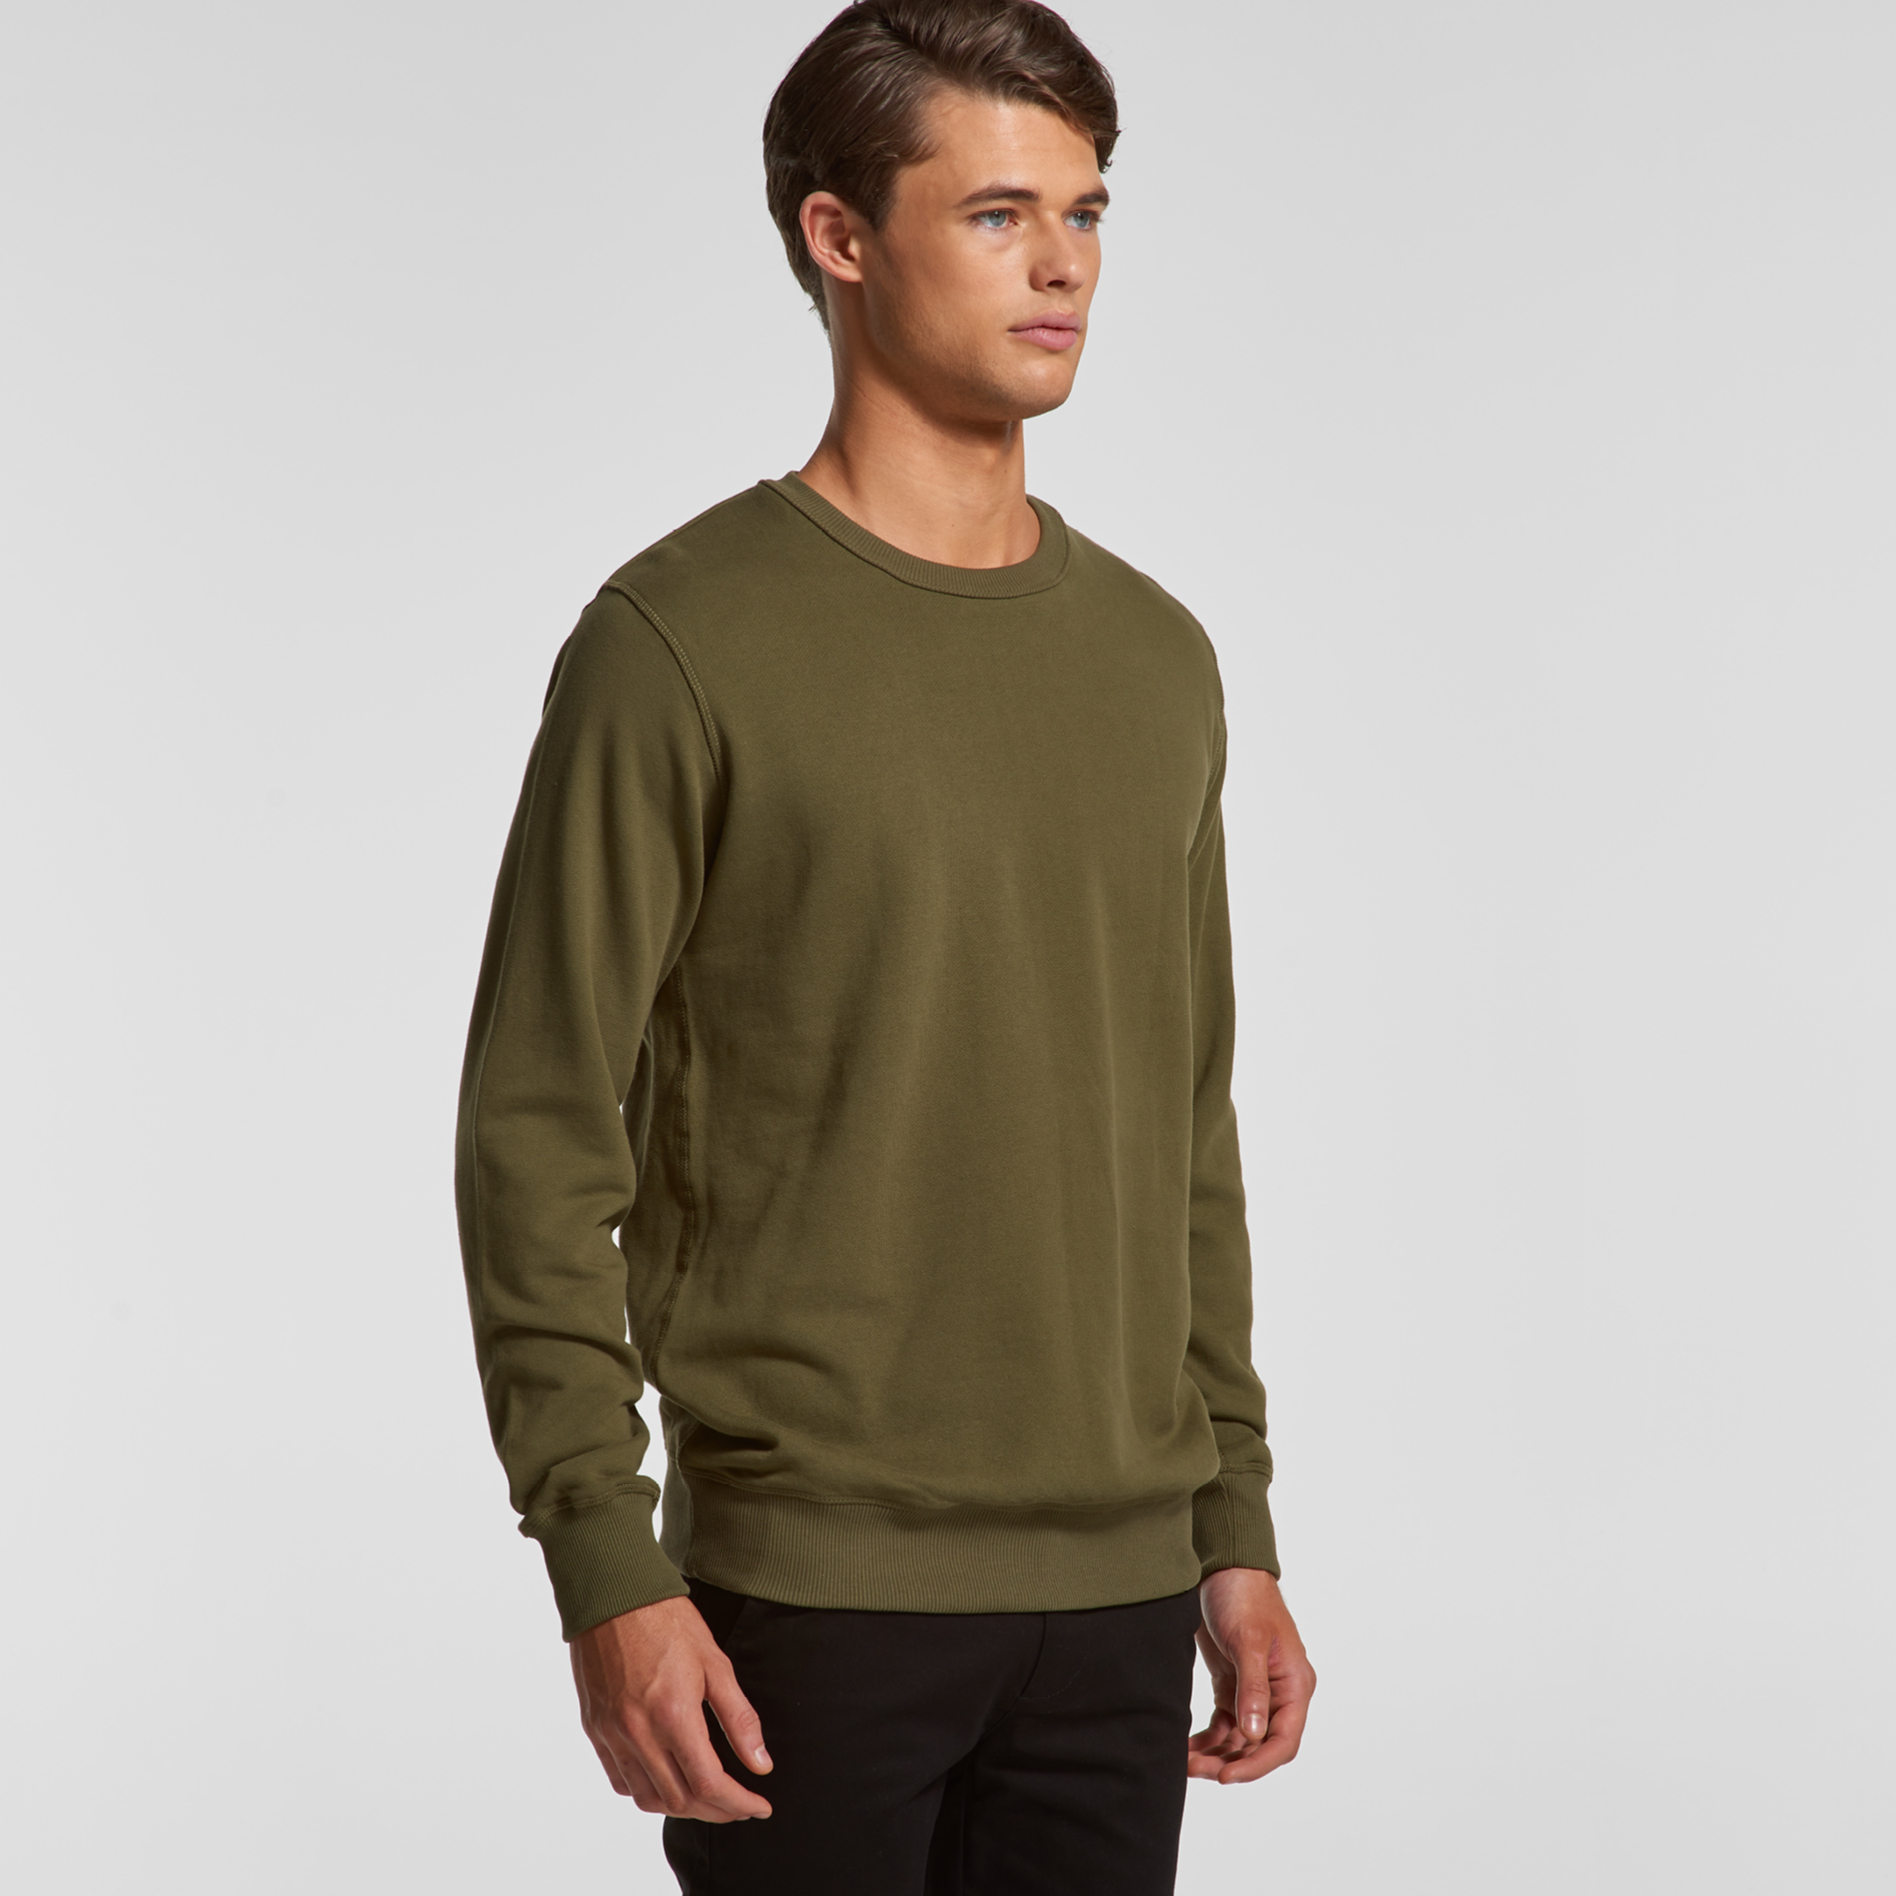 Mens Premium Crew | AS Colour | Withers and Co